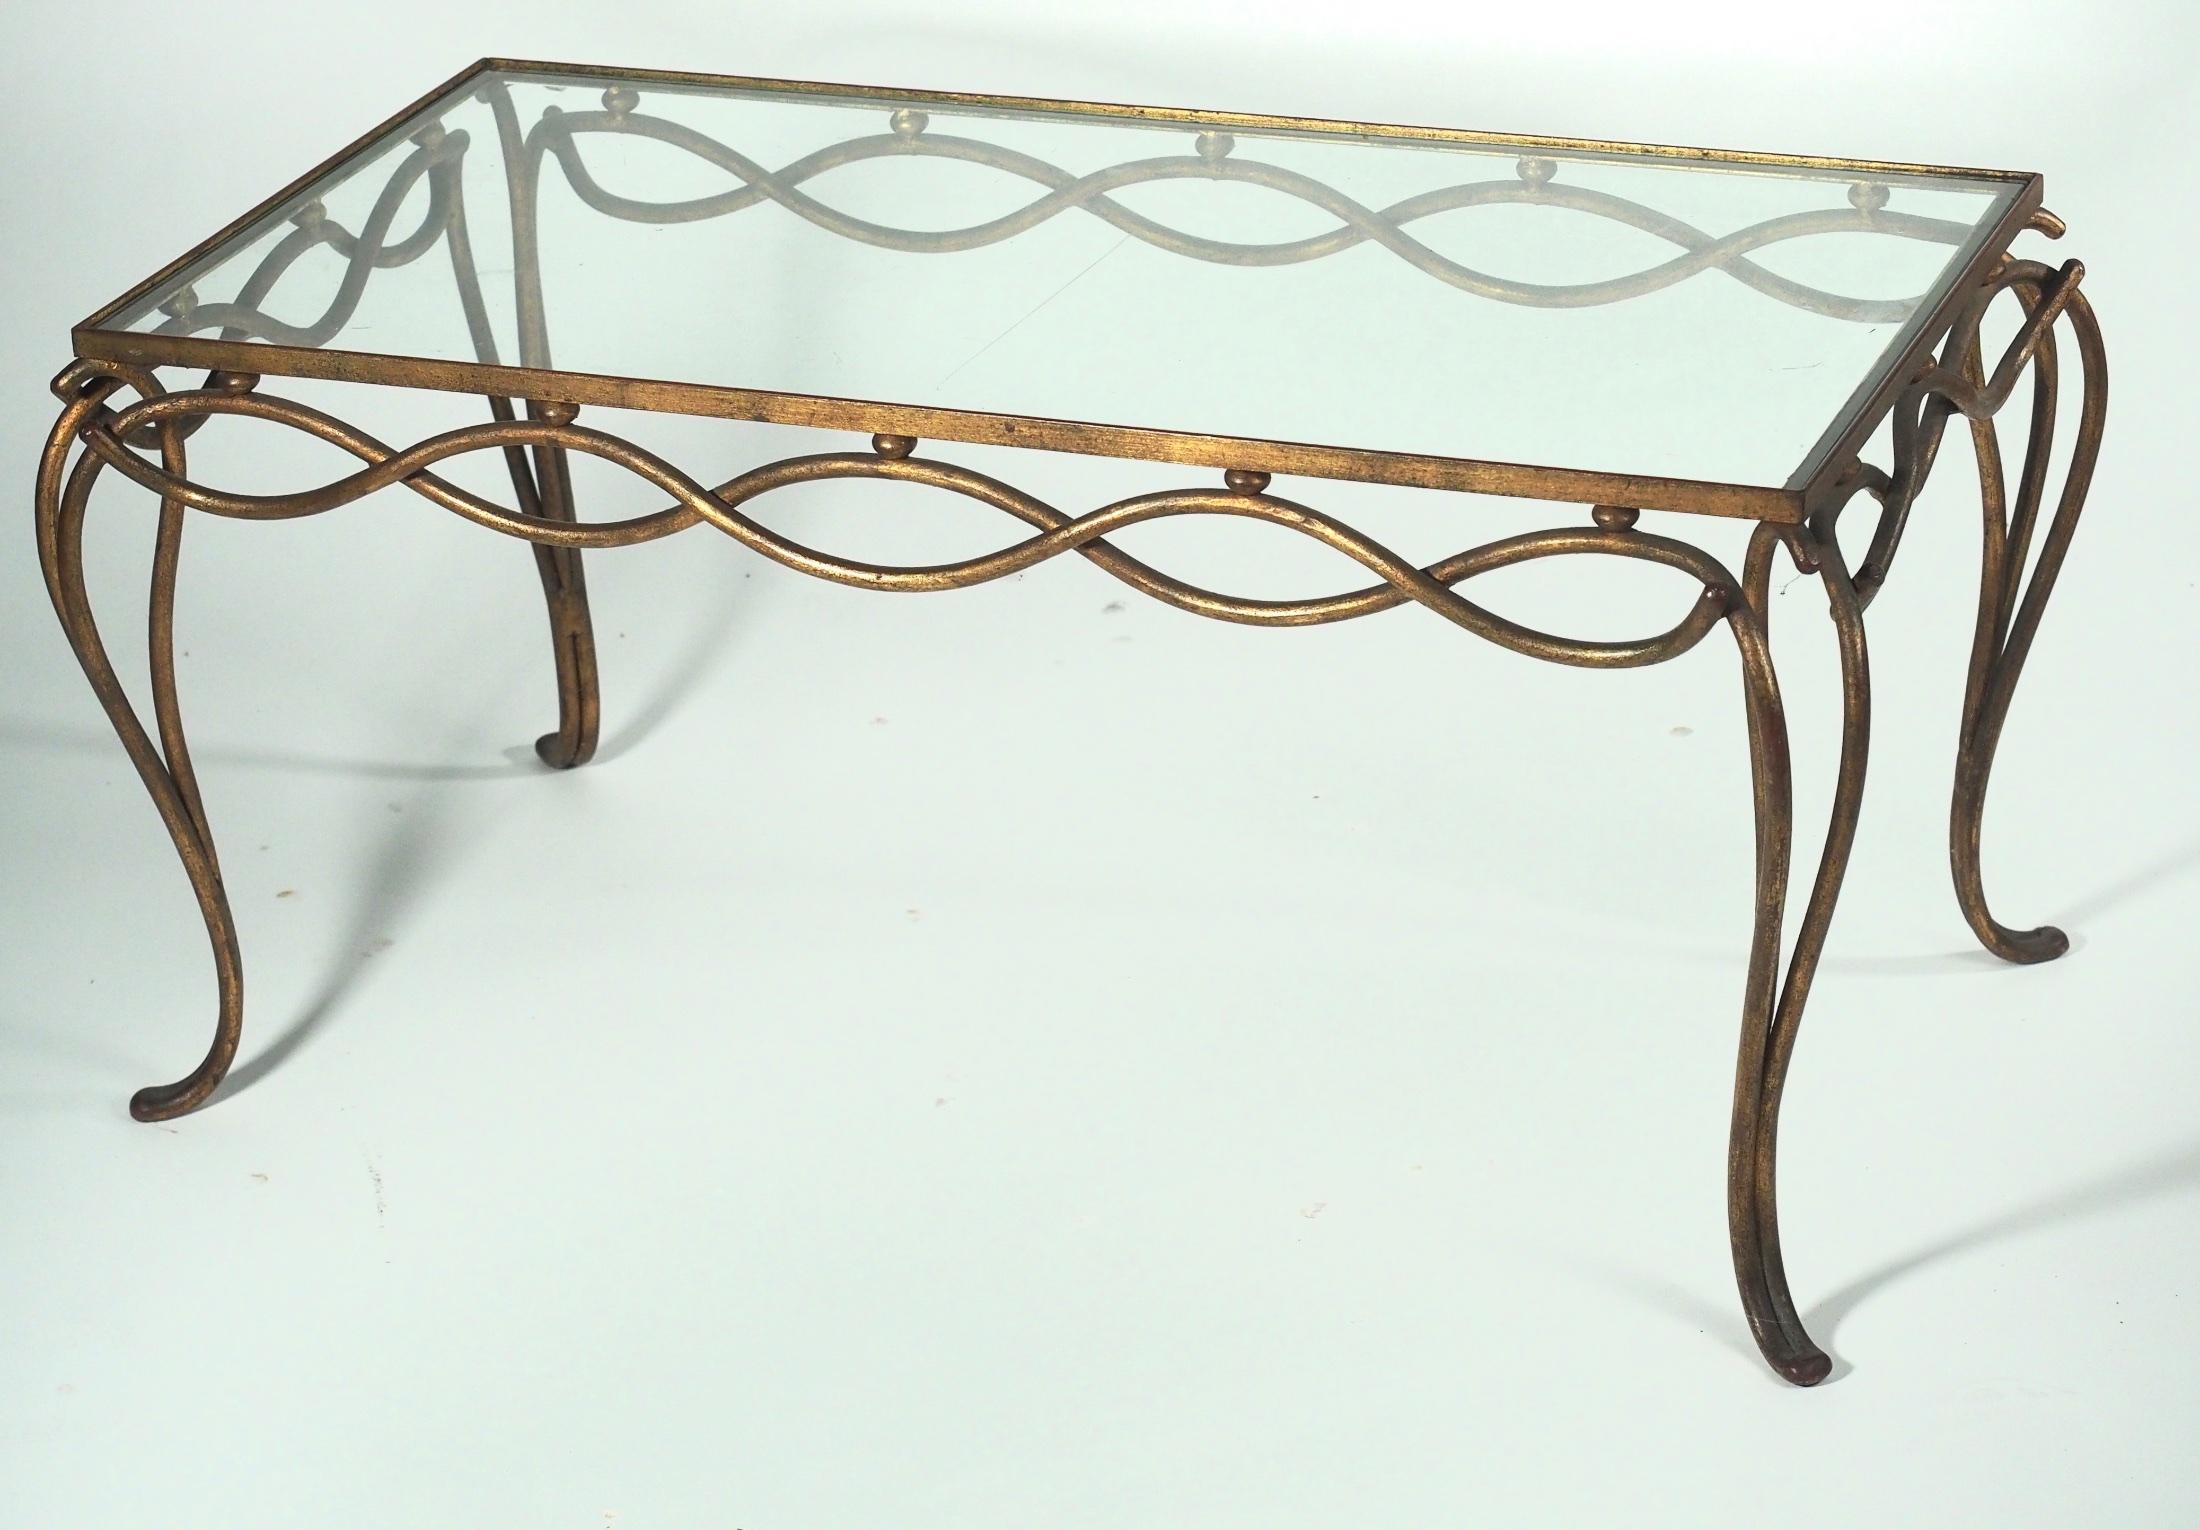 Art Deco Rene Drouet Gilt Forged Iron Coffee Table For Sale